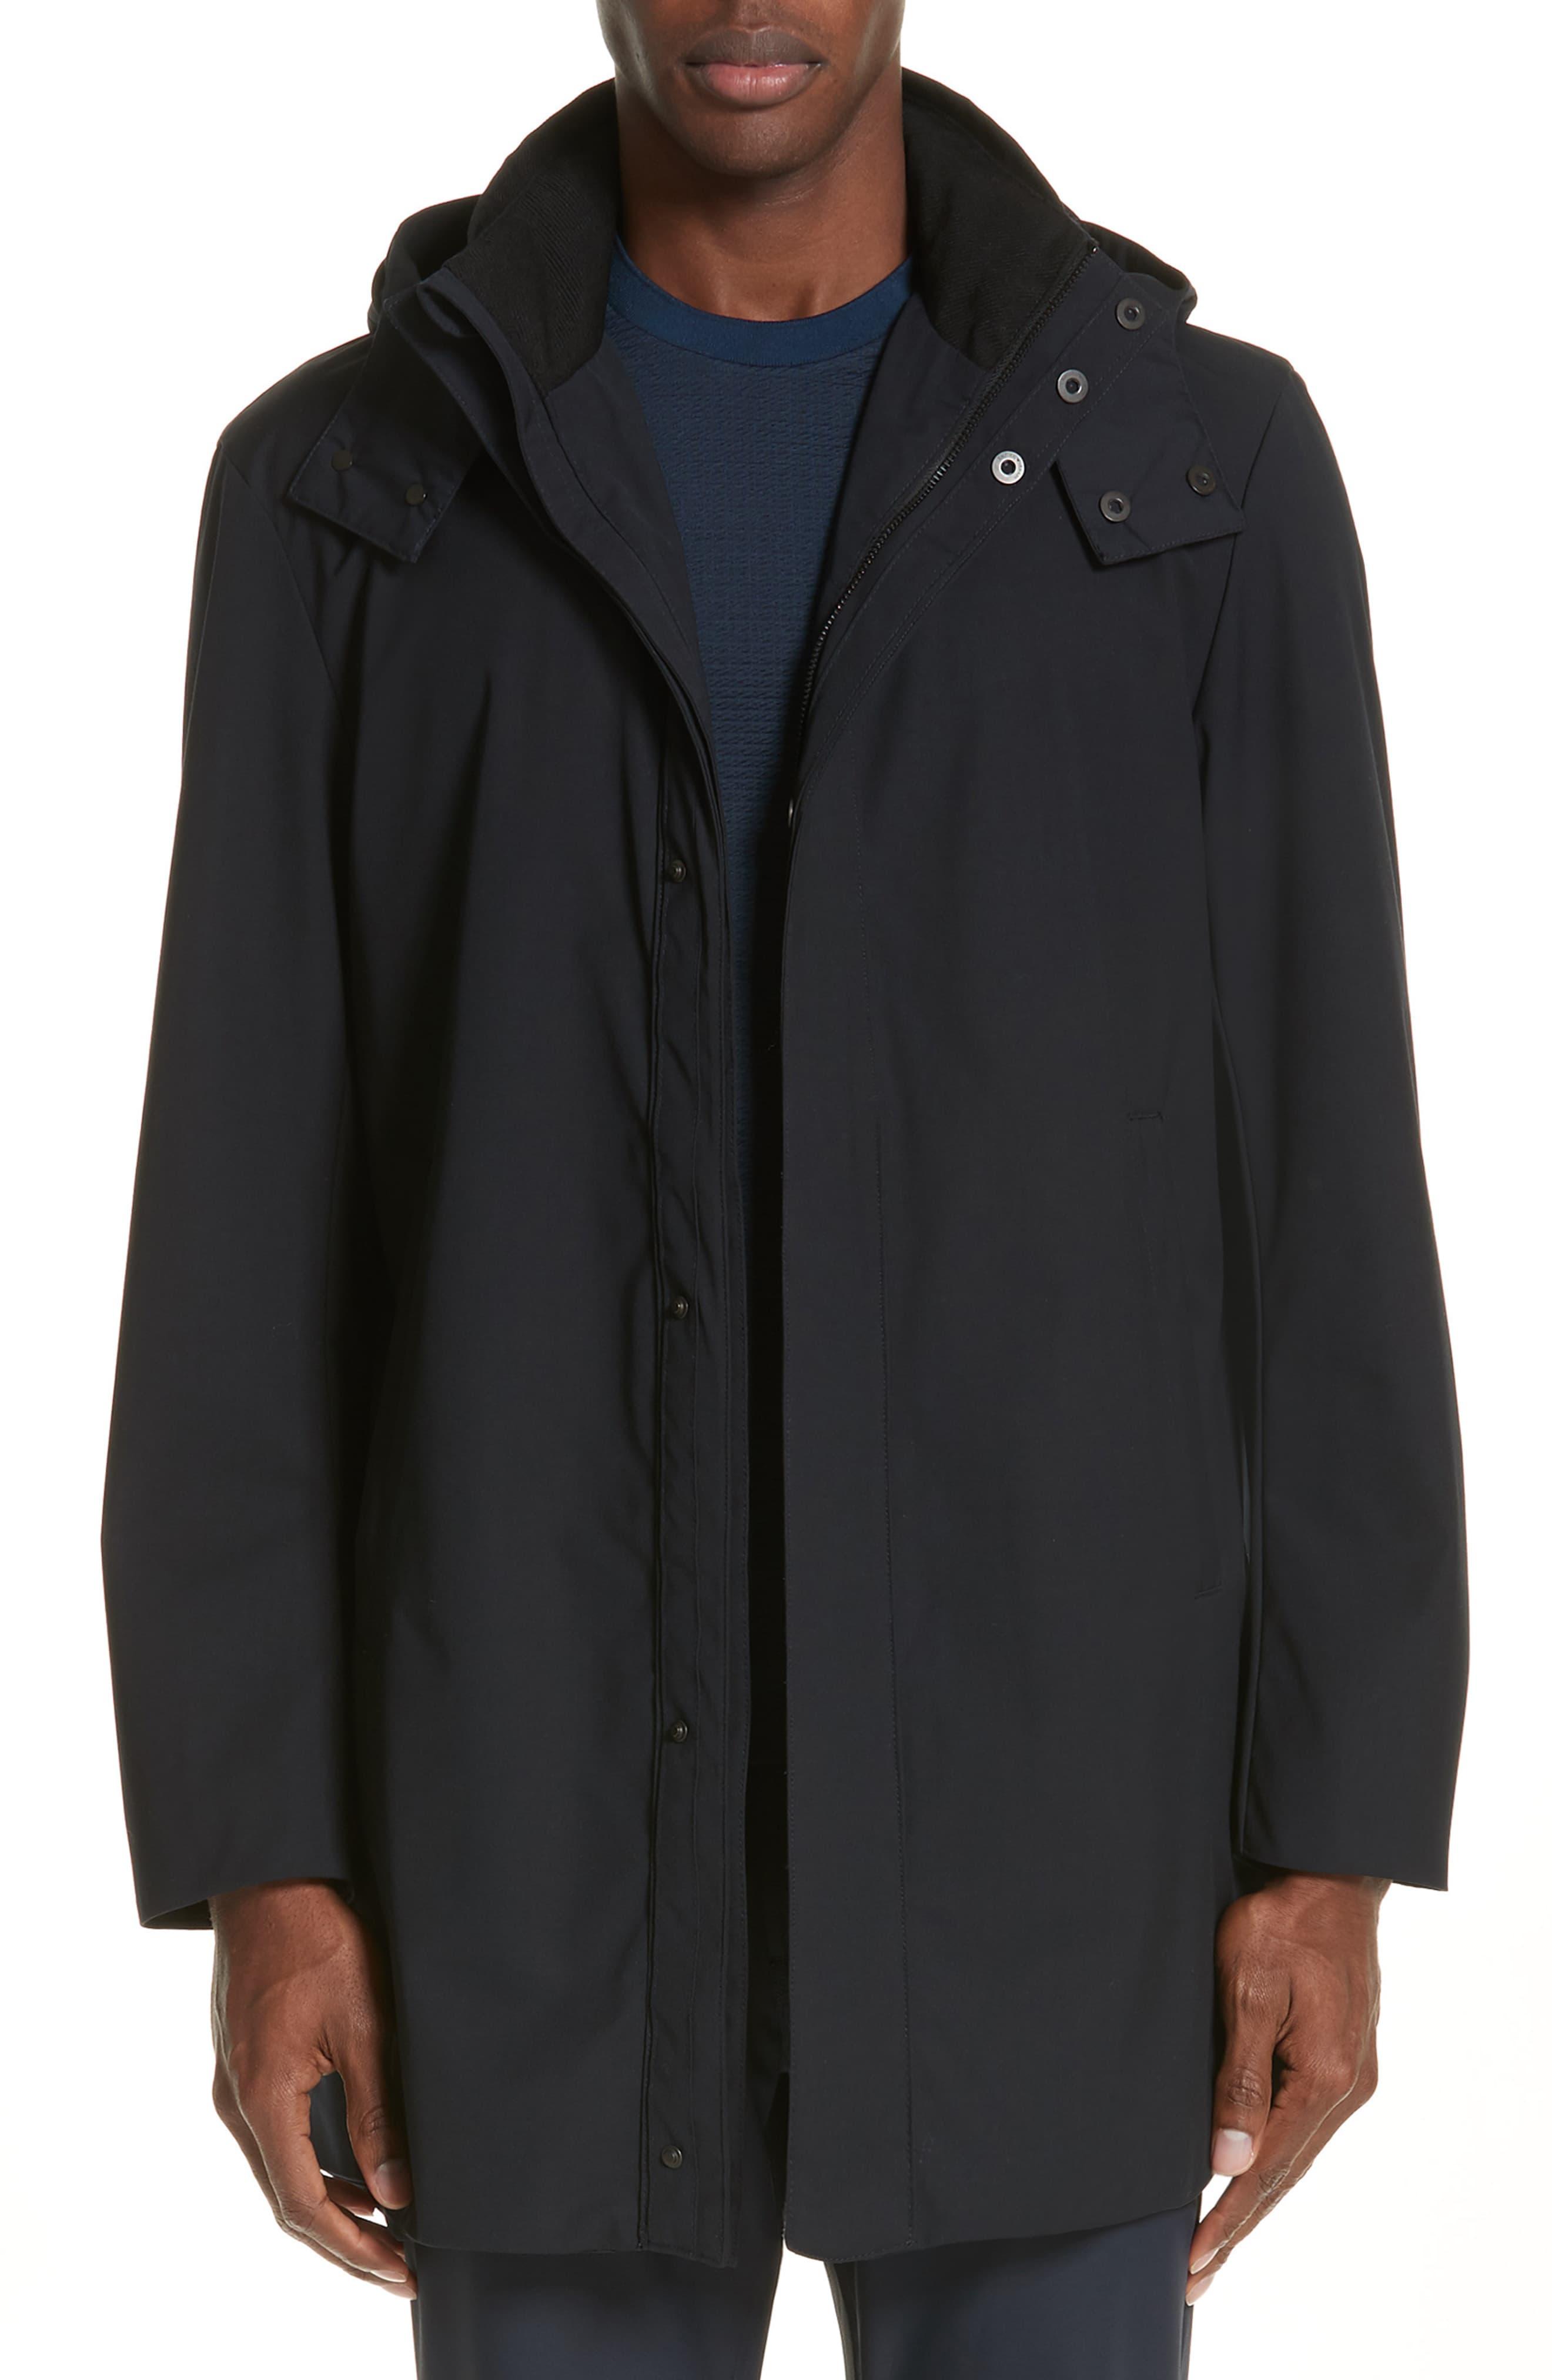 Emporio Armani Hooded Raincoat in Blue for Men - Lyst